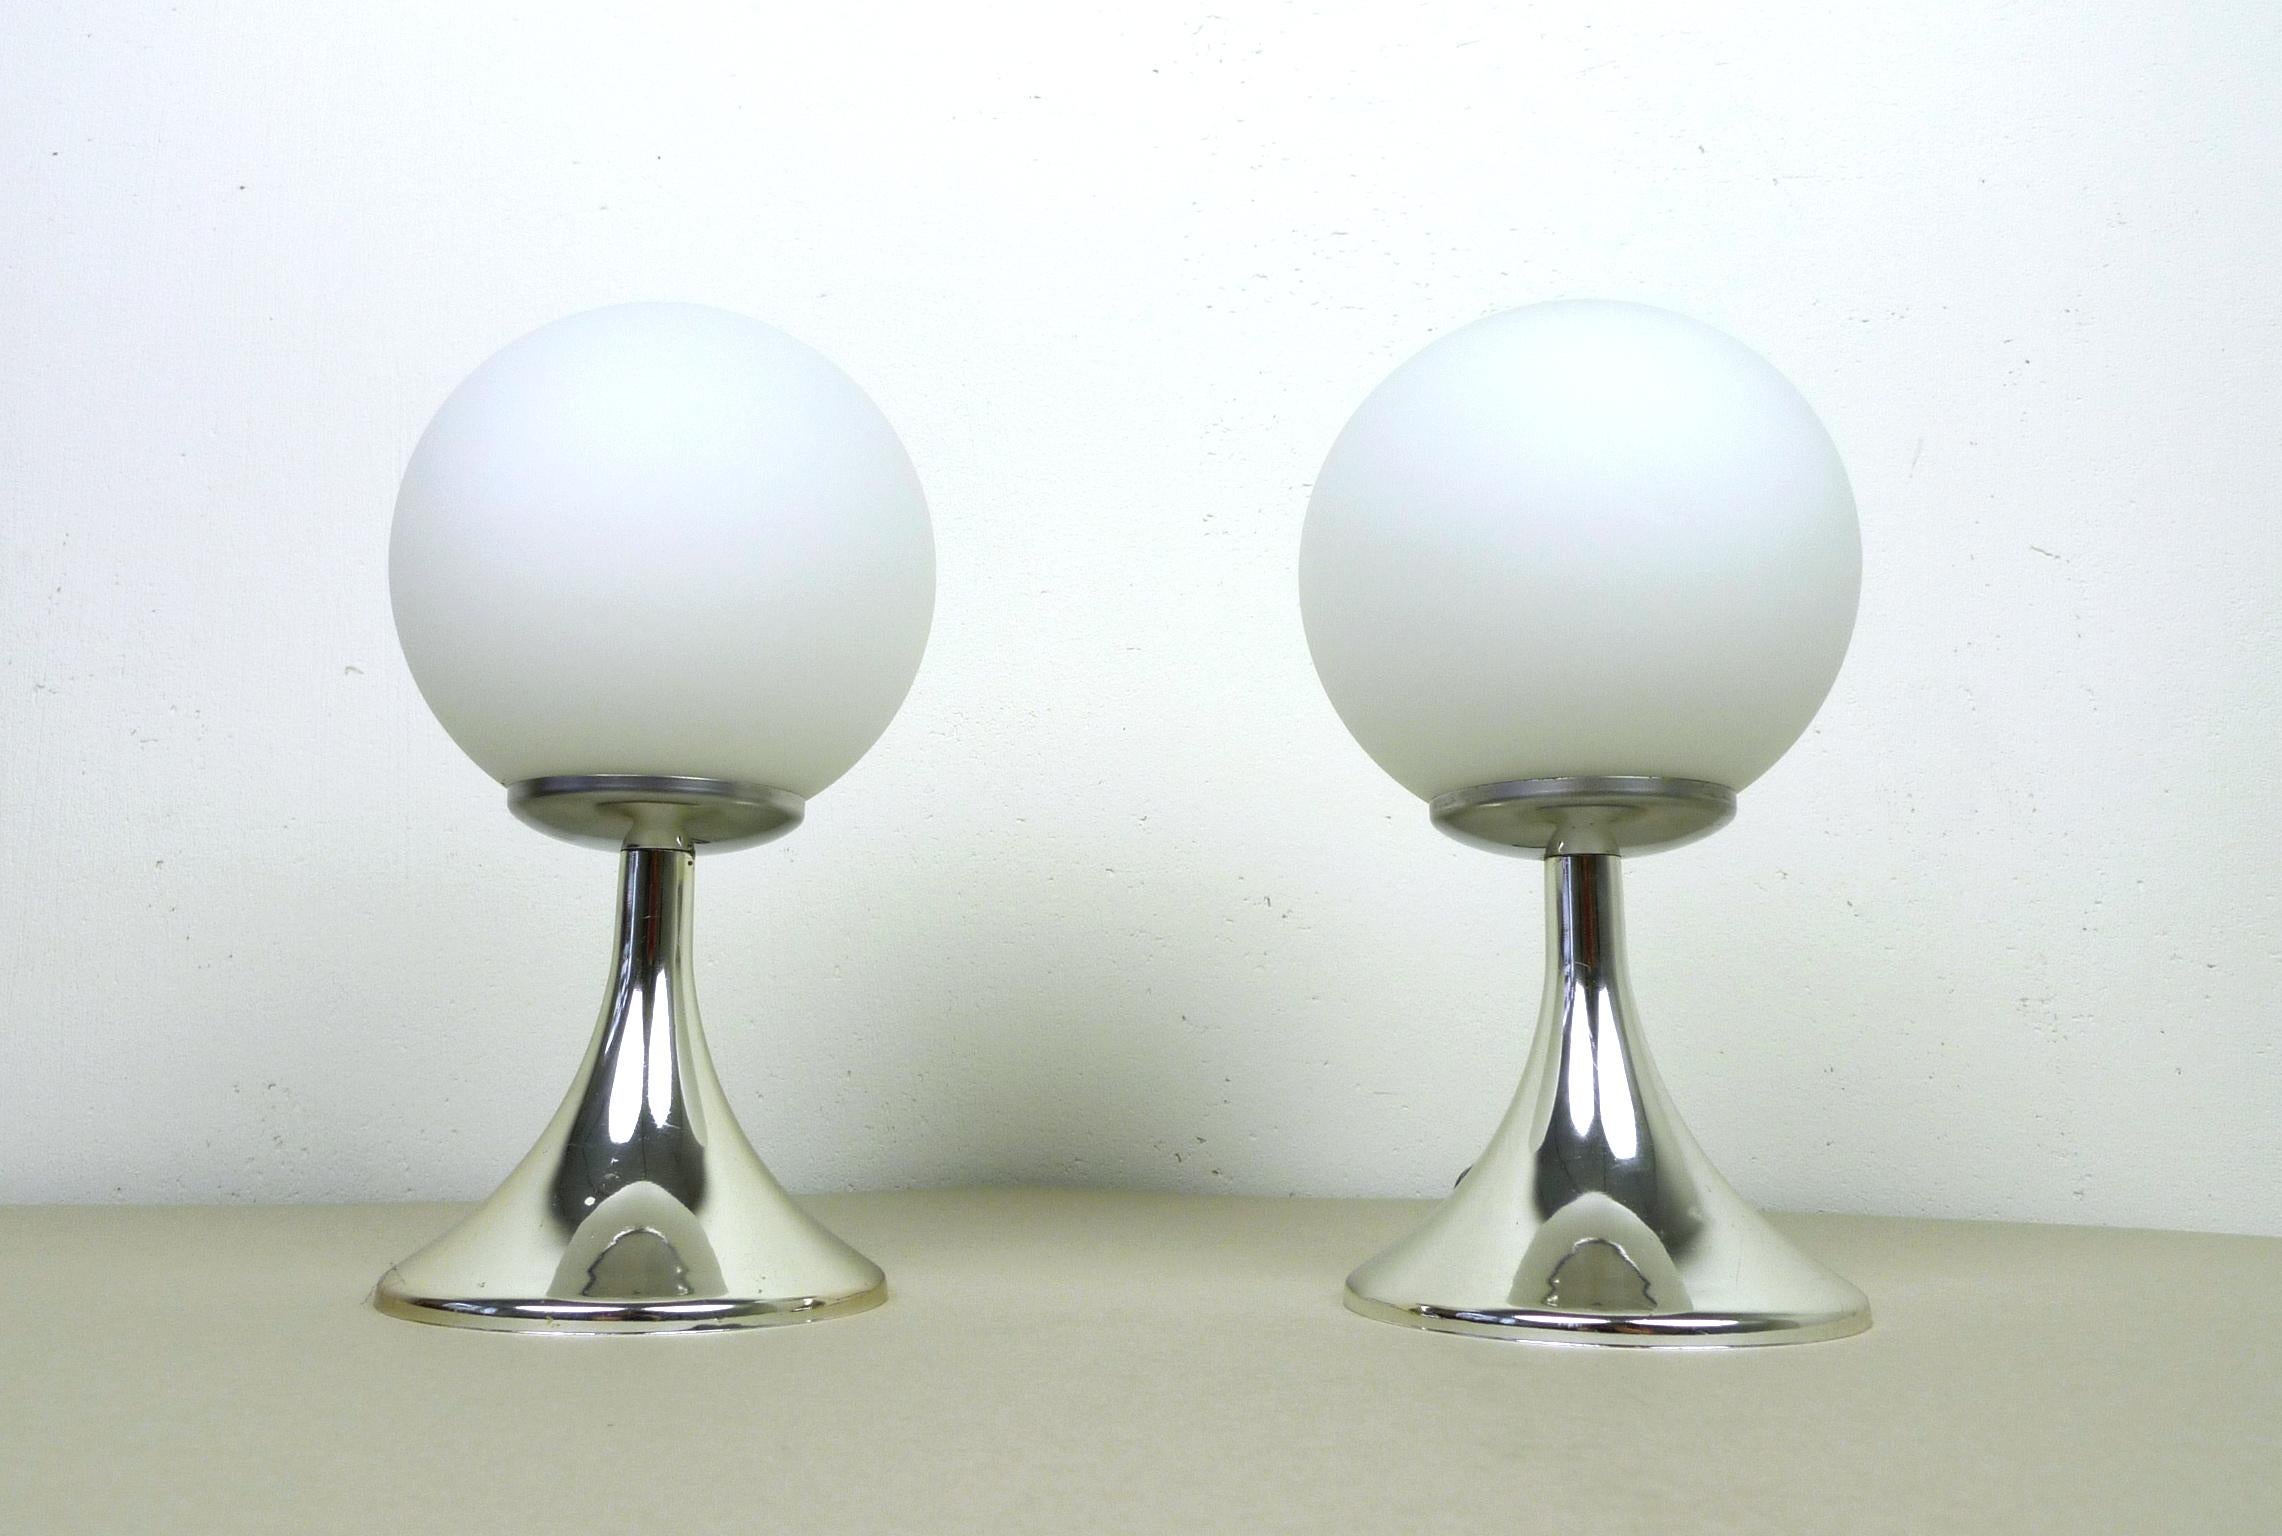 Space Age Pair of Table Lamps with Chromed Tulip Bases, Germany, 1960s